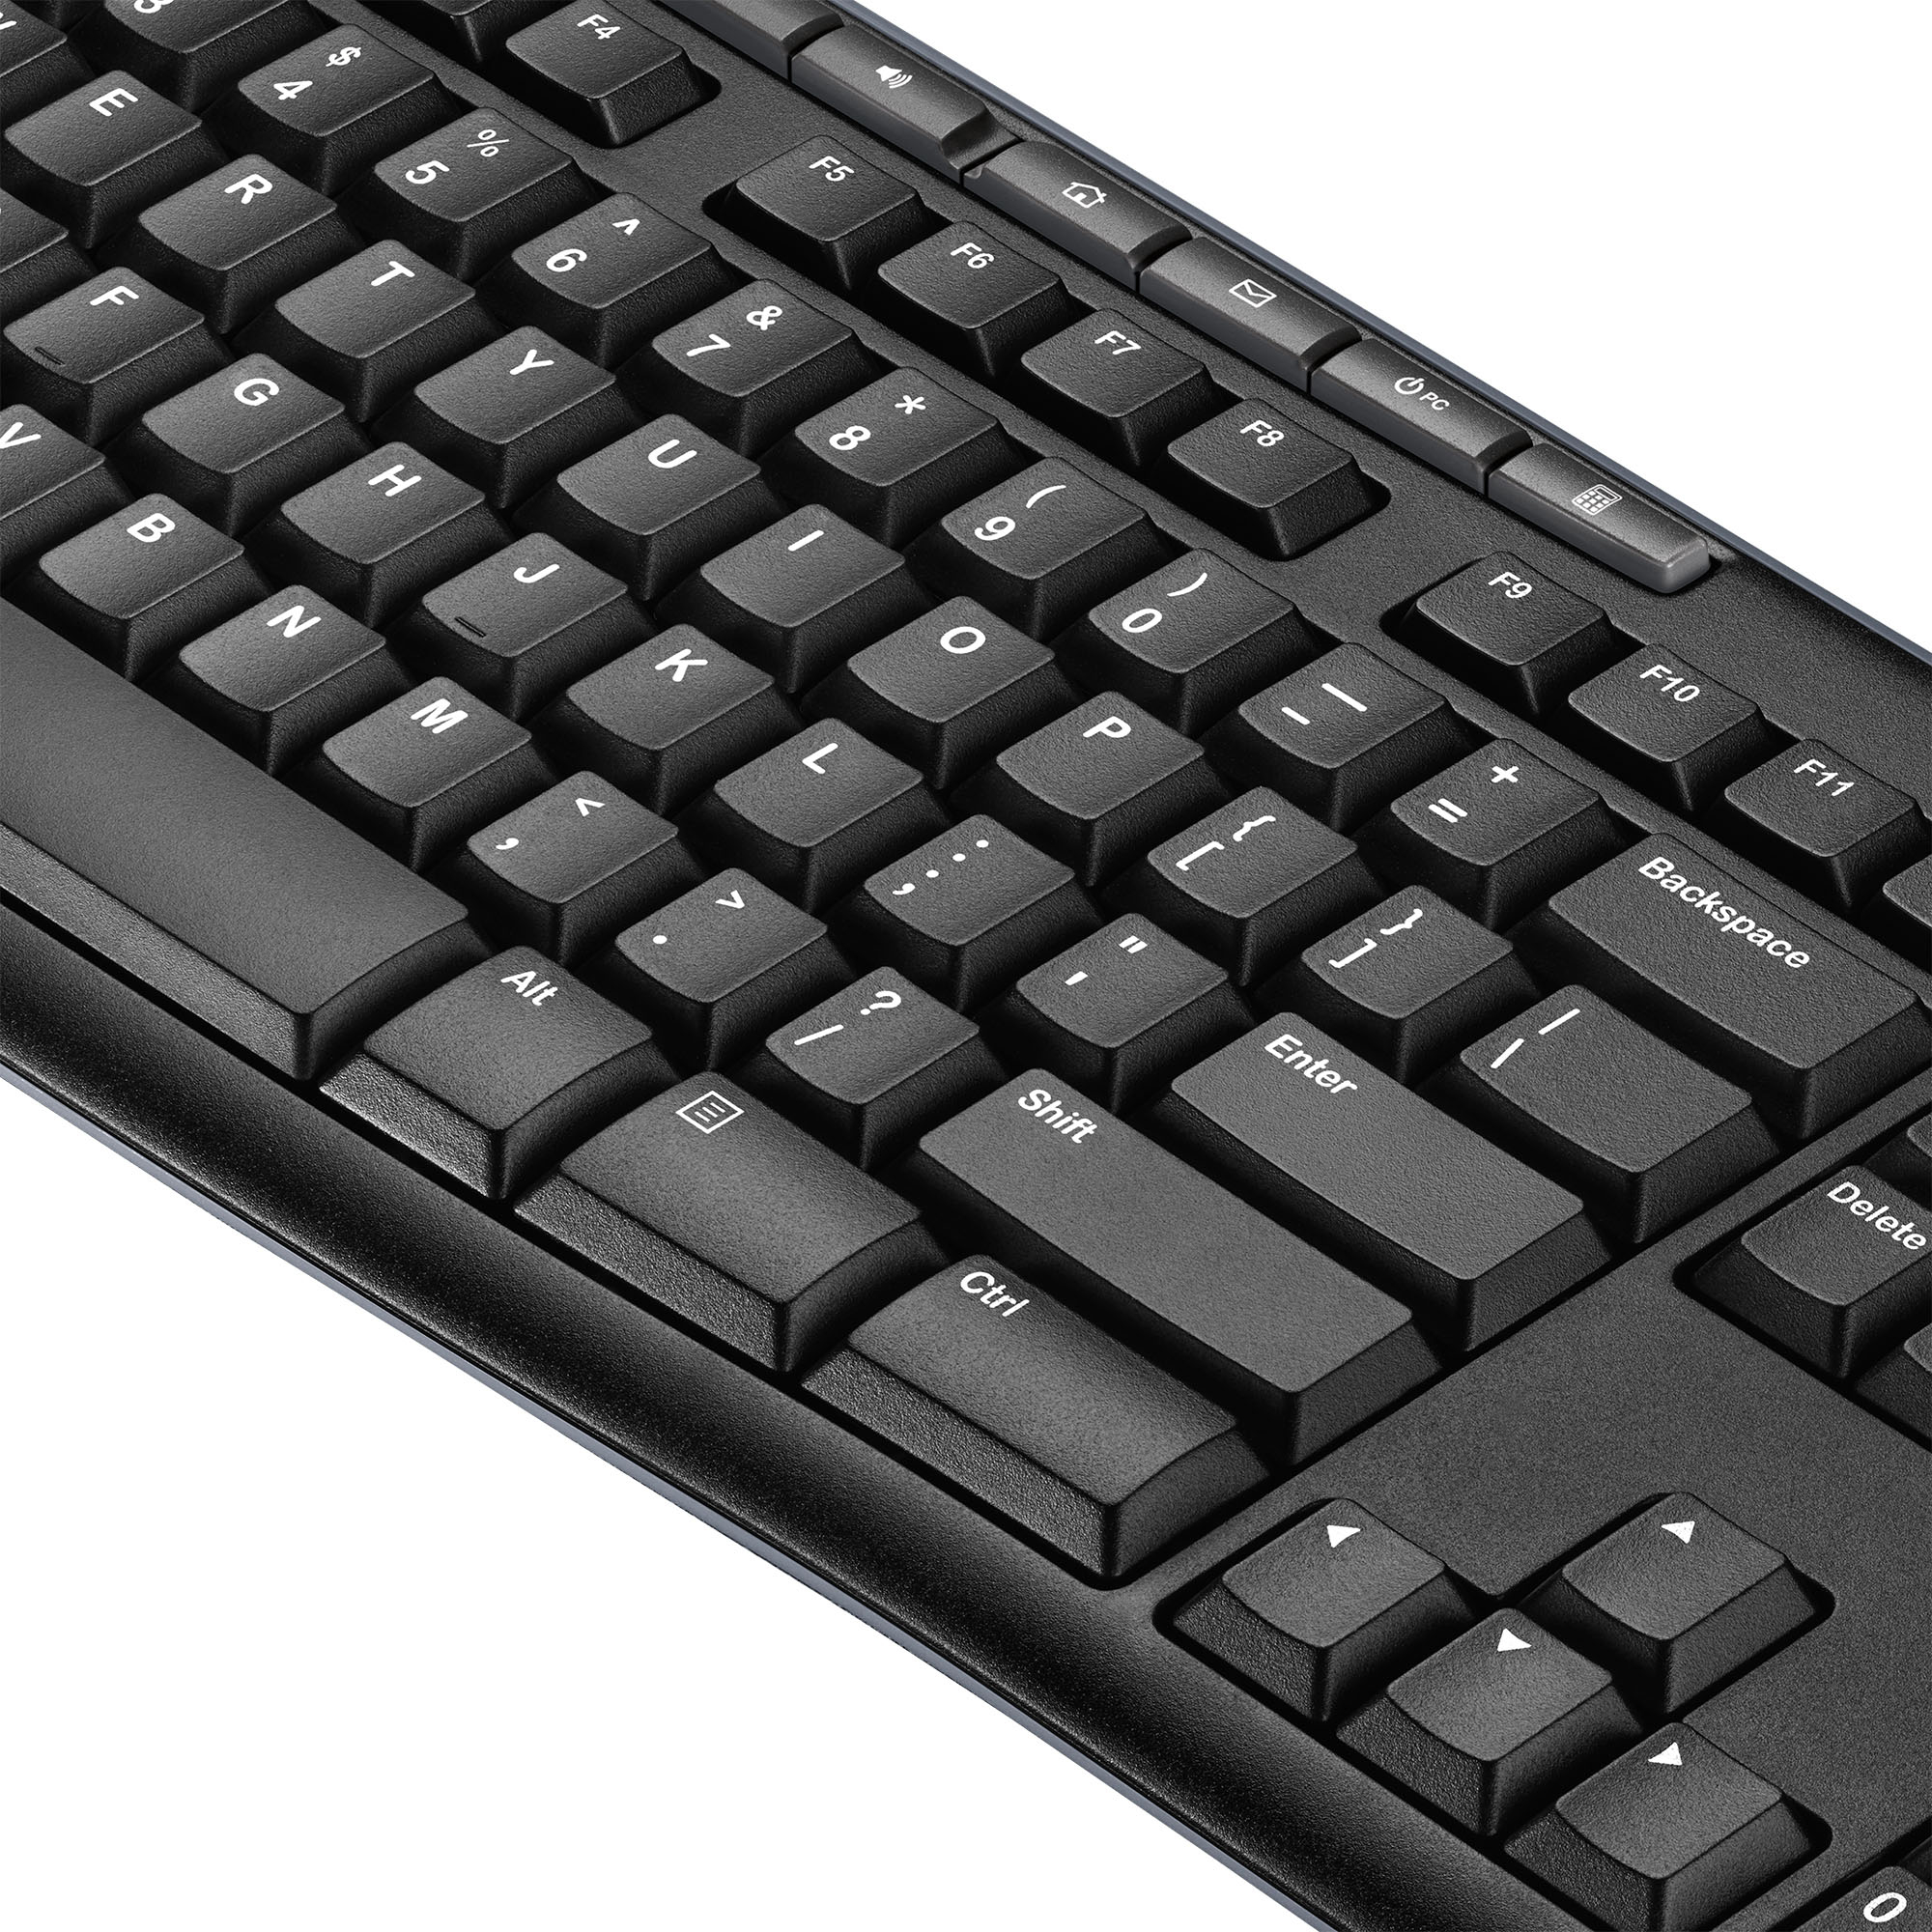 MK270 Full-size Wireless Membrane Keyboard and Mouse Bundle for PC Black 920-004536 - Best Buy